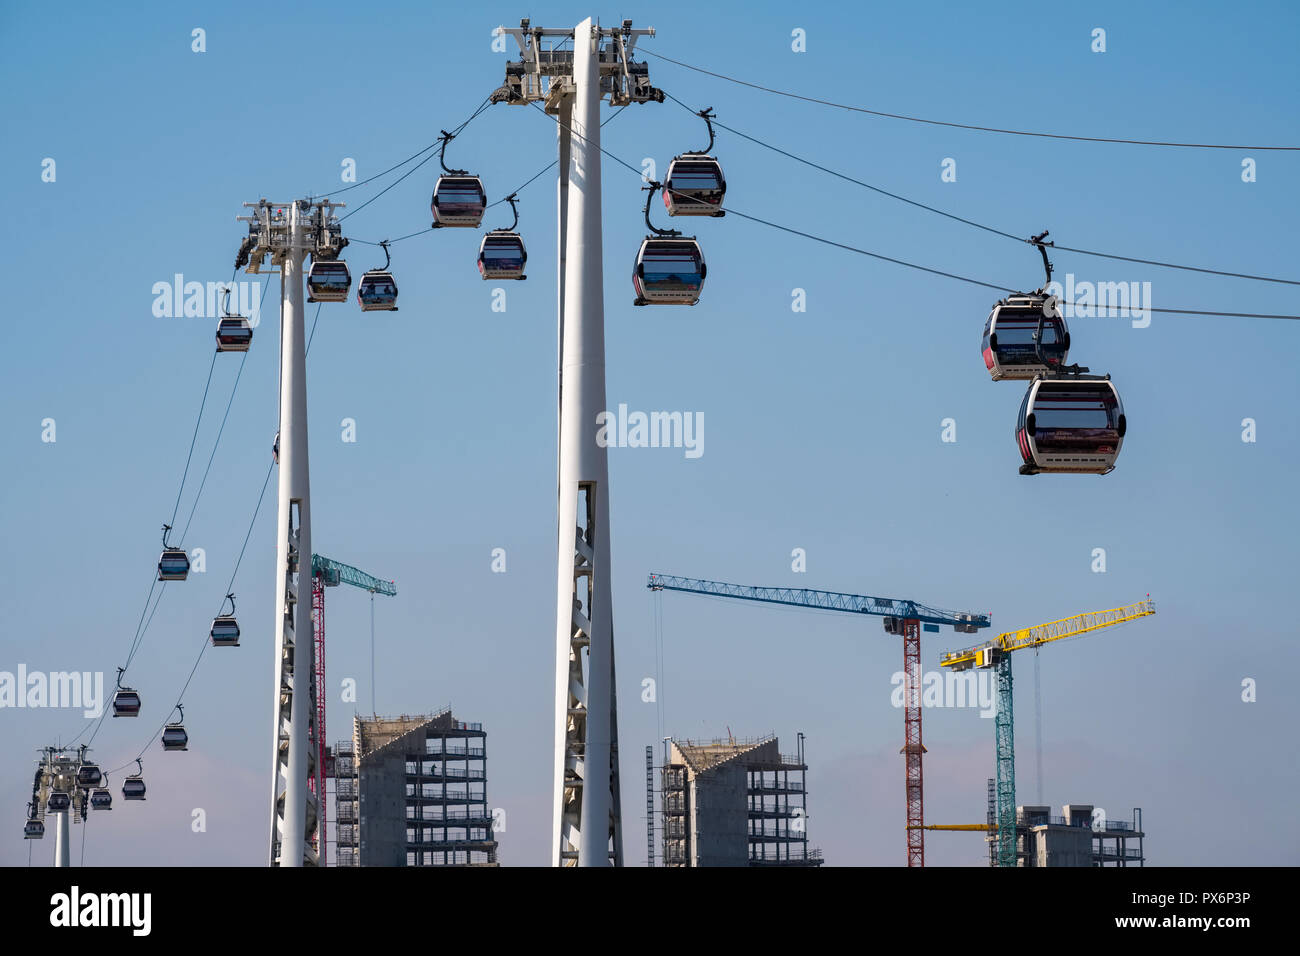 Emirates Air Line Cable Cars and Gondola Lift, Greenwich, London, England, UK Stock Photo